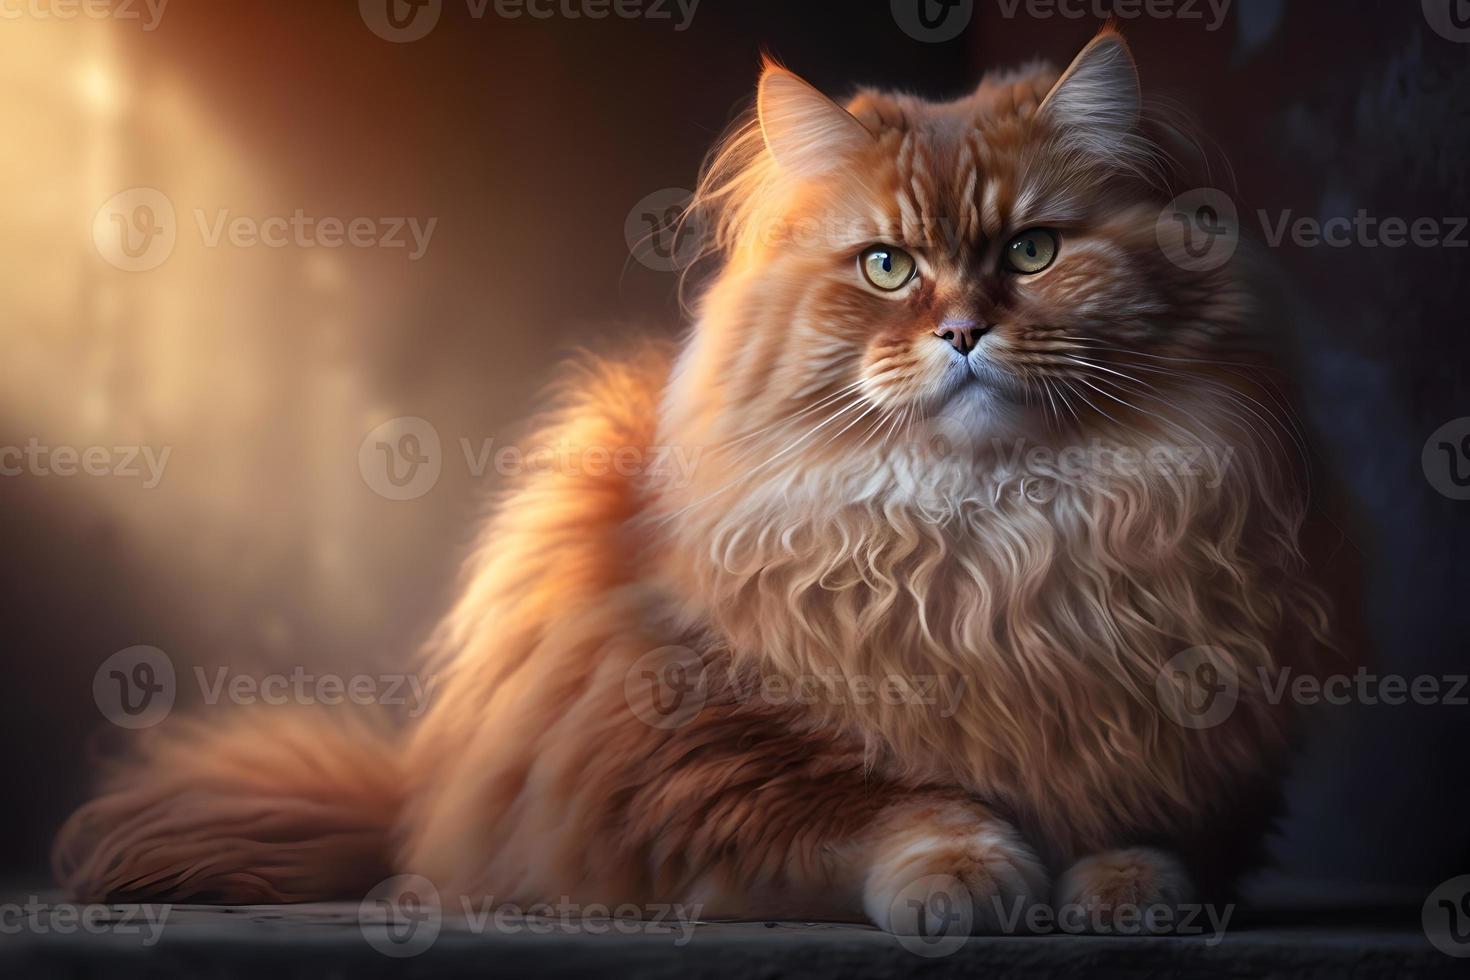 Portrait of a funny beautiful red fluffy cat in the interior, pets photography photo